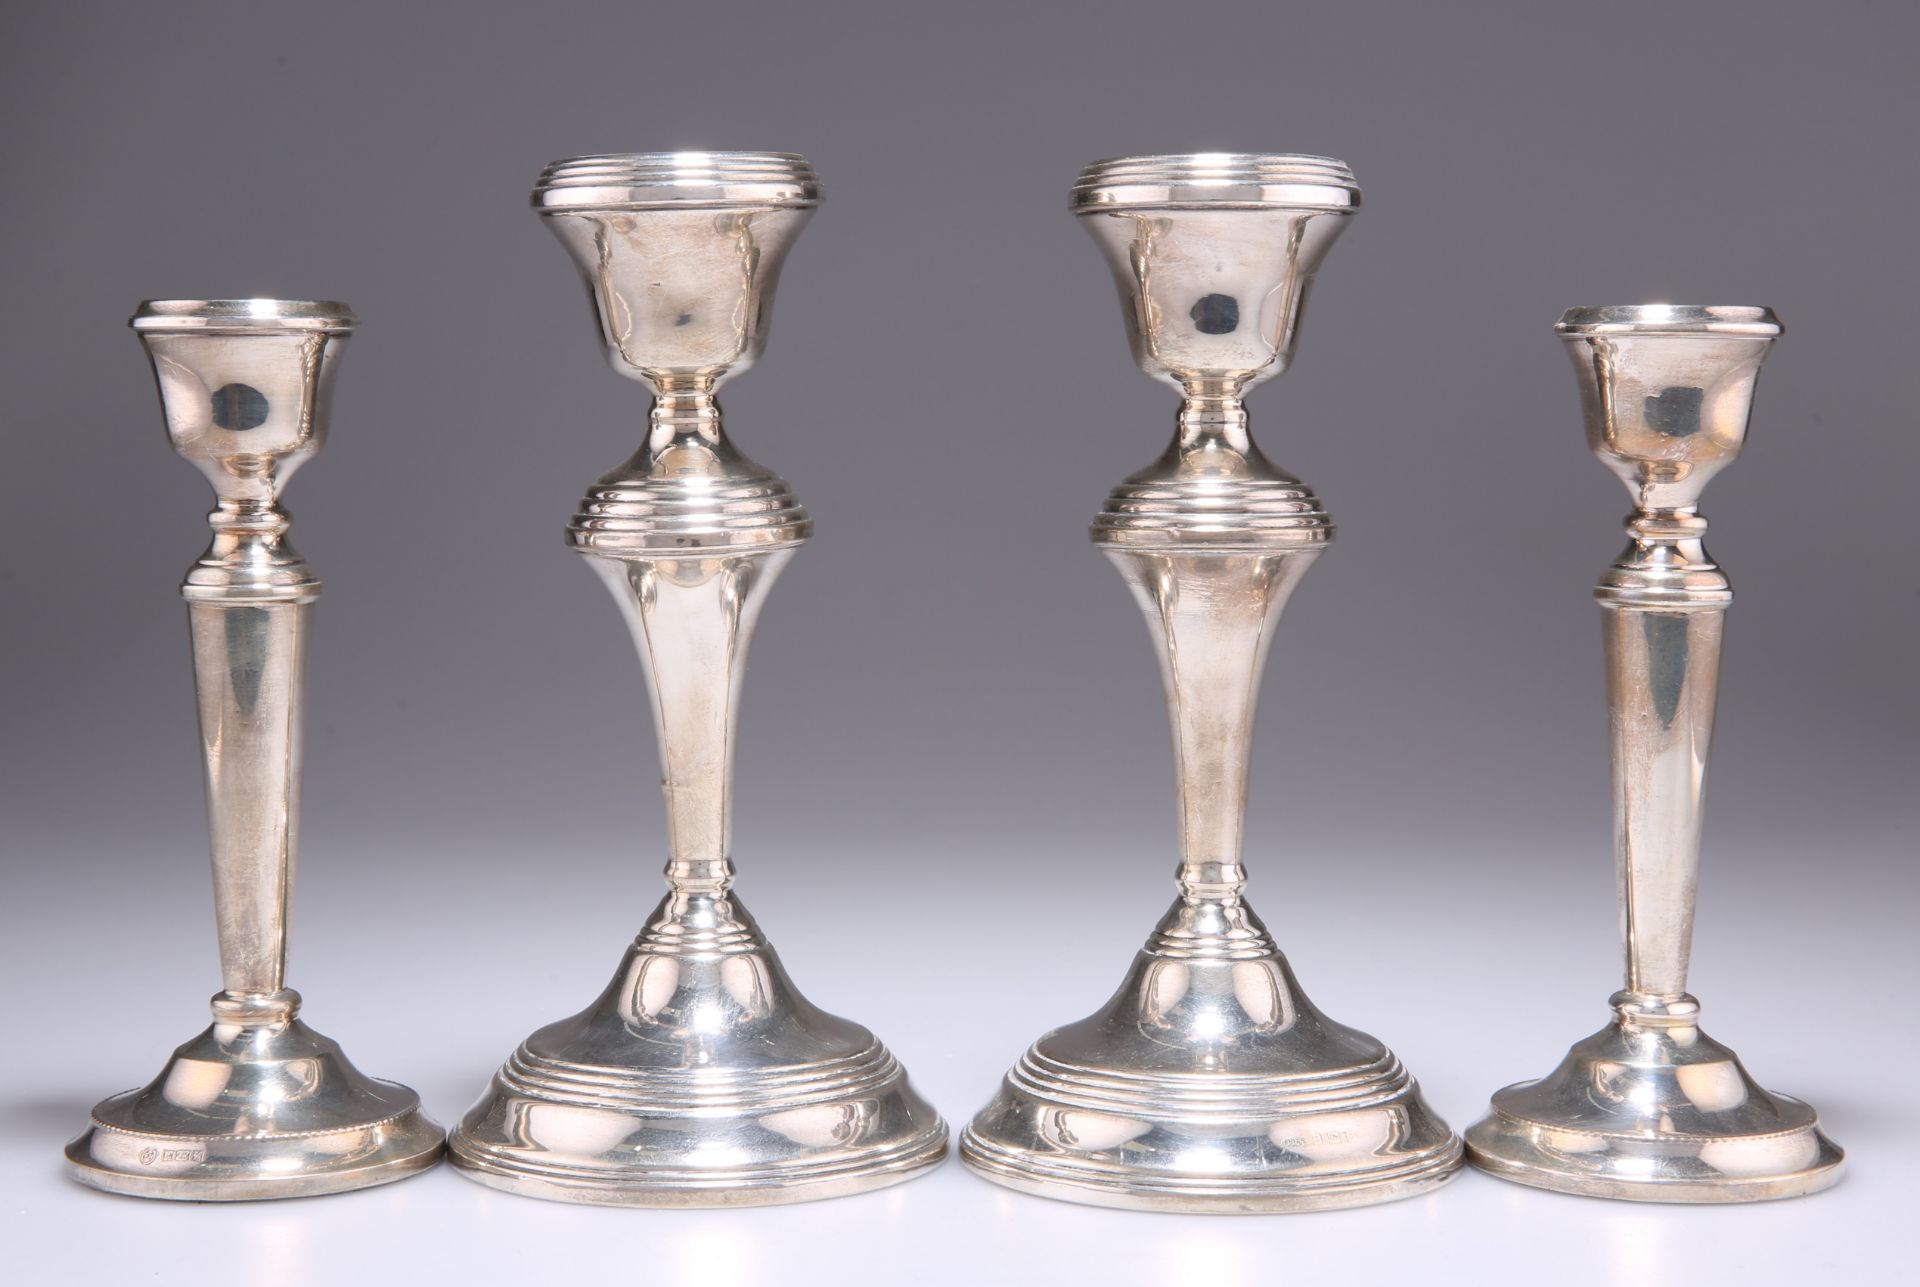 TWO PAIRS OF ELIZABETH II SILVER CANDLESTICKS